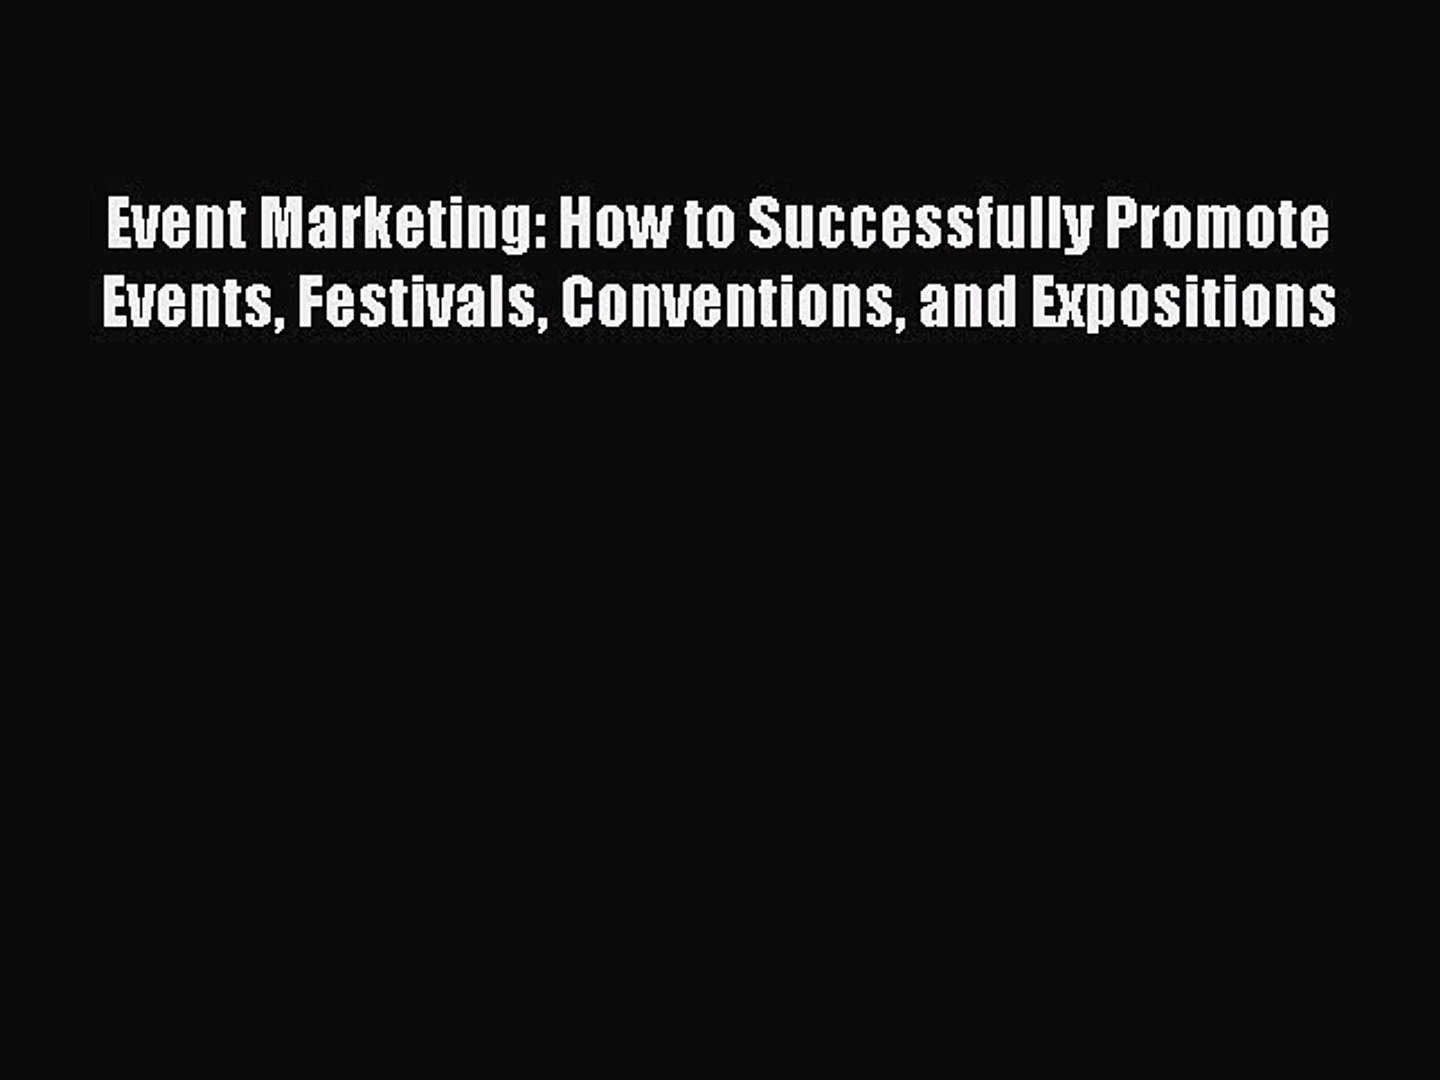 Download Event Marketing: How to Successfully Promote Events Festivals Conventions and Expositions